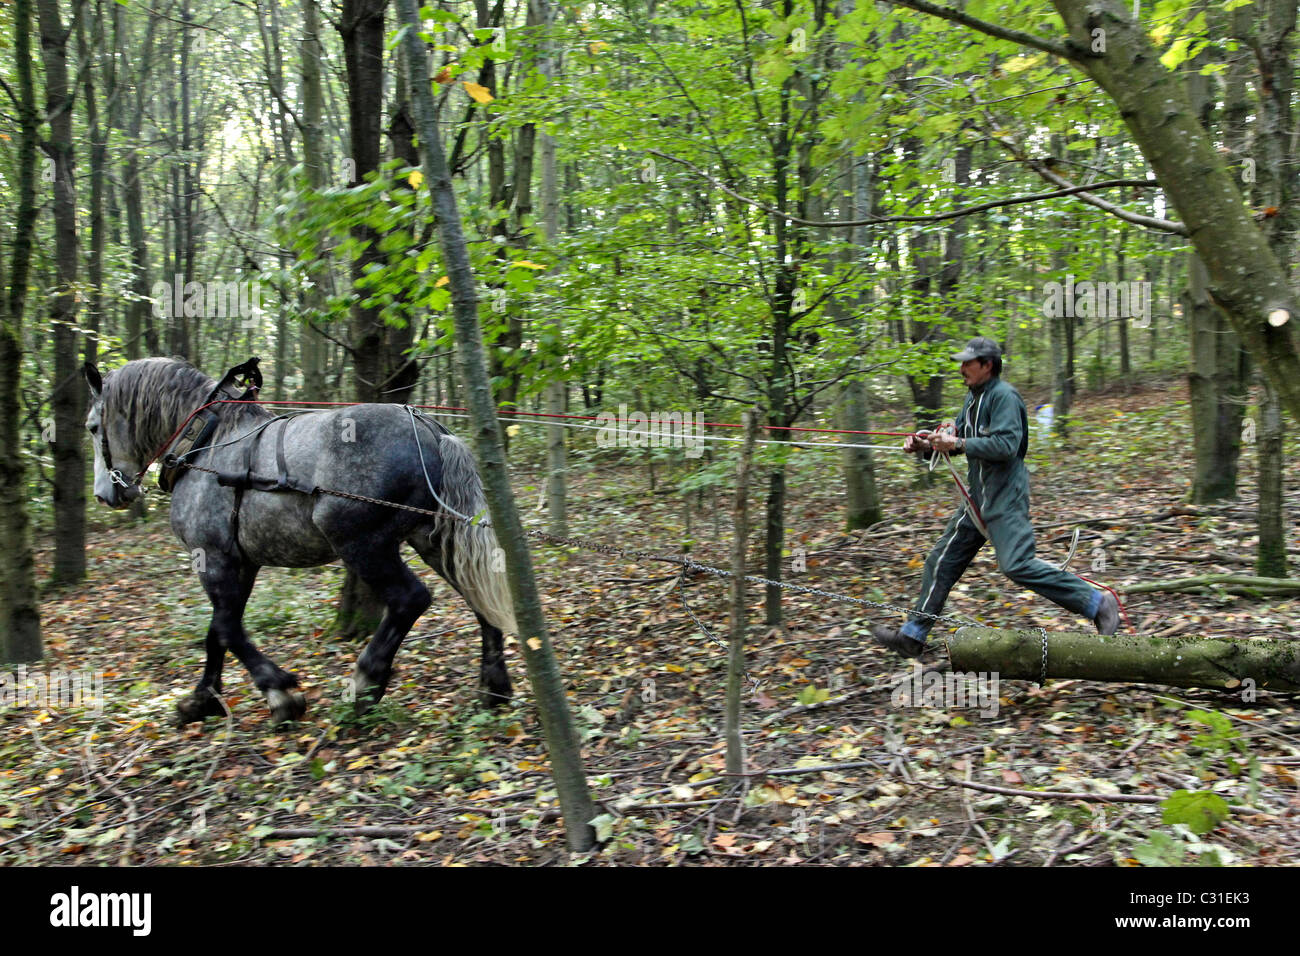 A HORSE PULLING ROUGH LUMBER, PERCHERON HORSES USED FOR THE LOGGING OF FOREST TIMBER, EURE-ET-LOIR (28), FRANCE Stock Photo